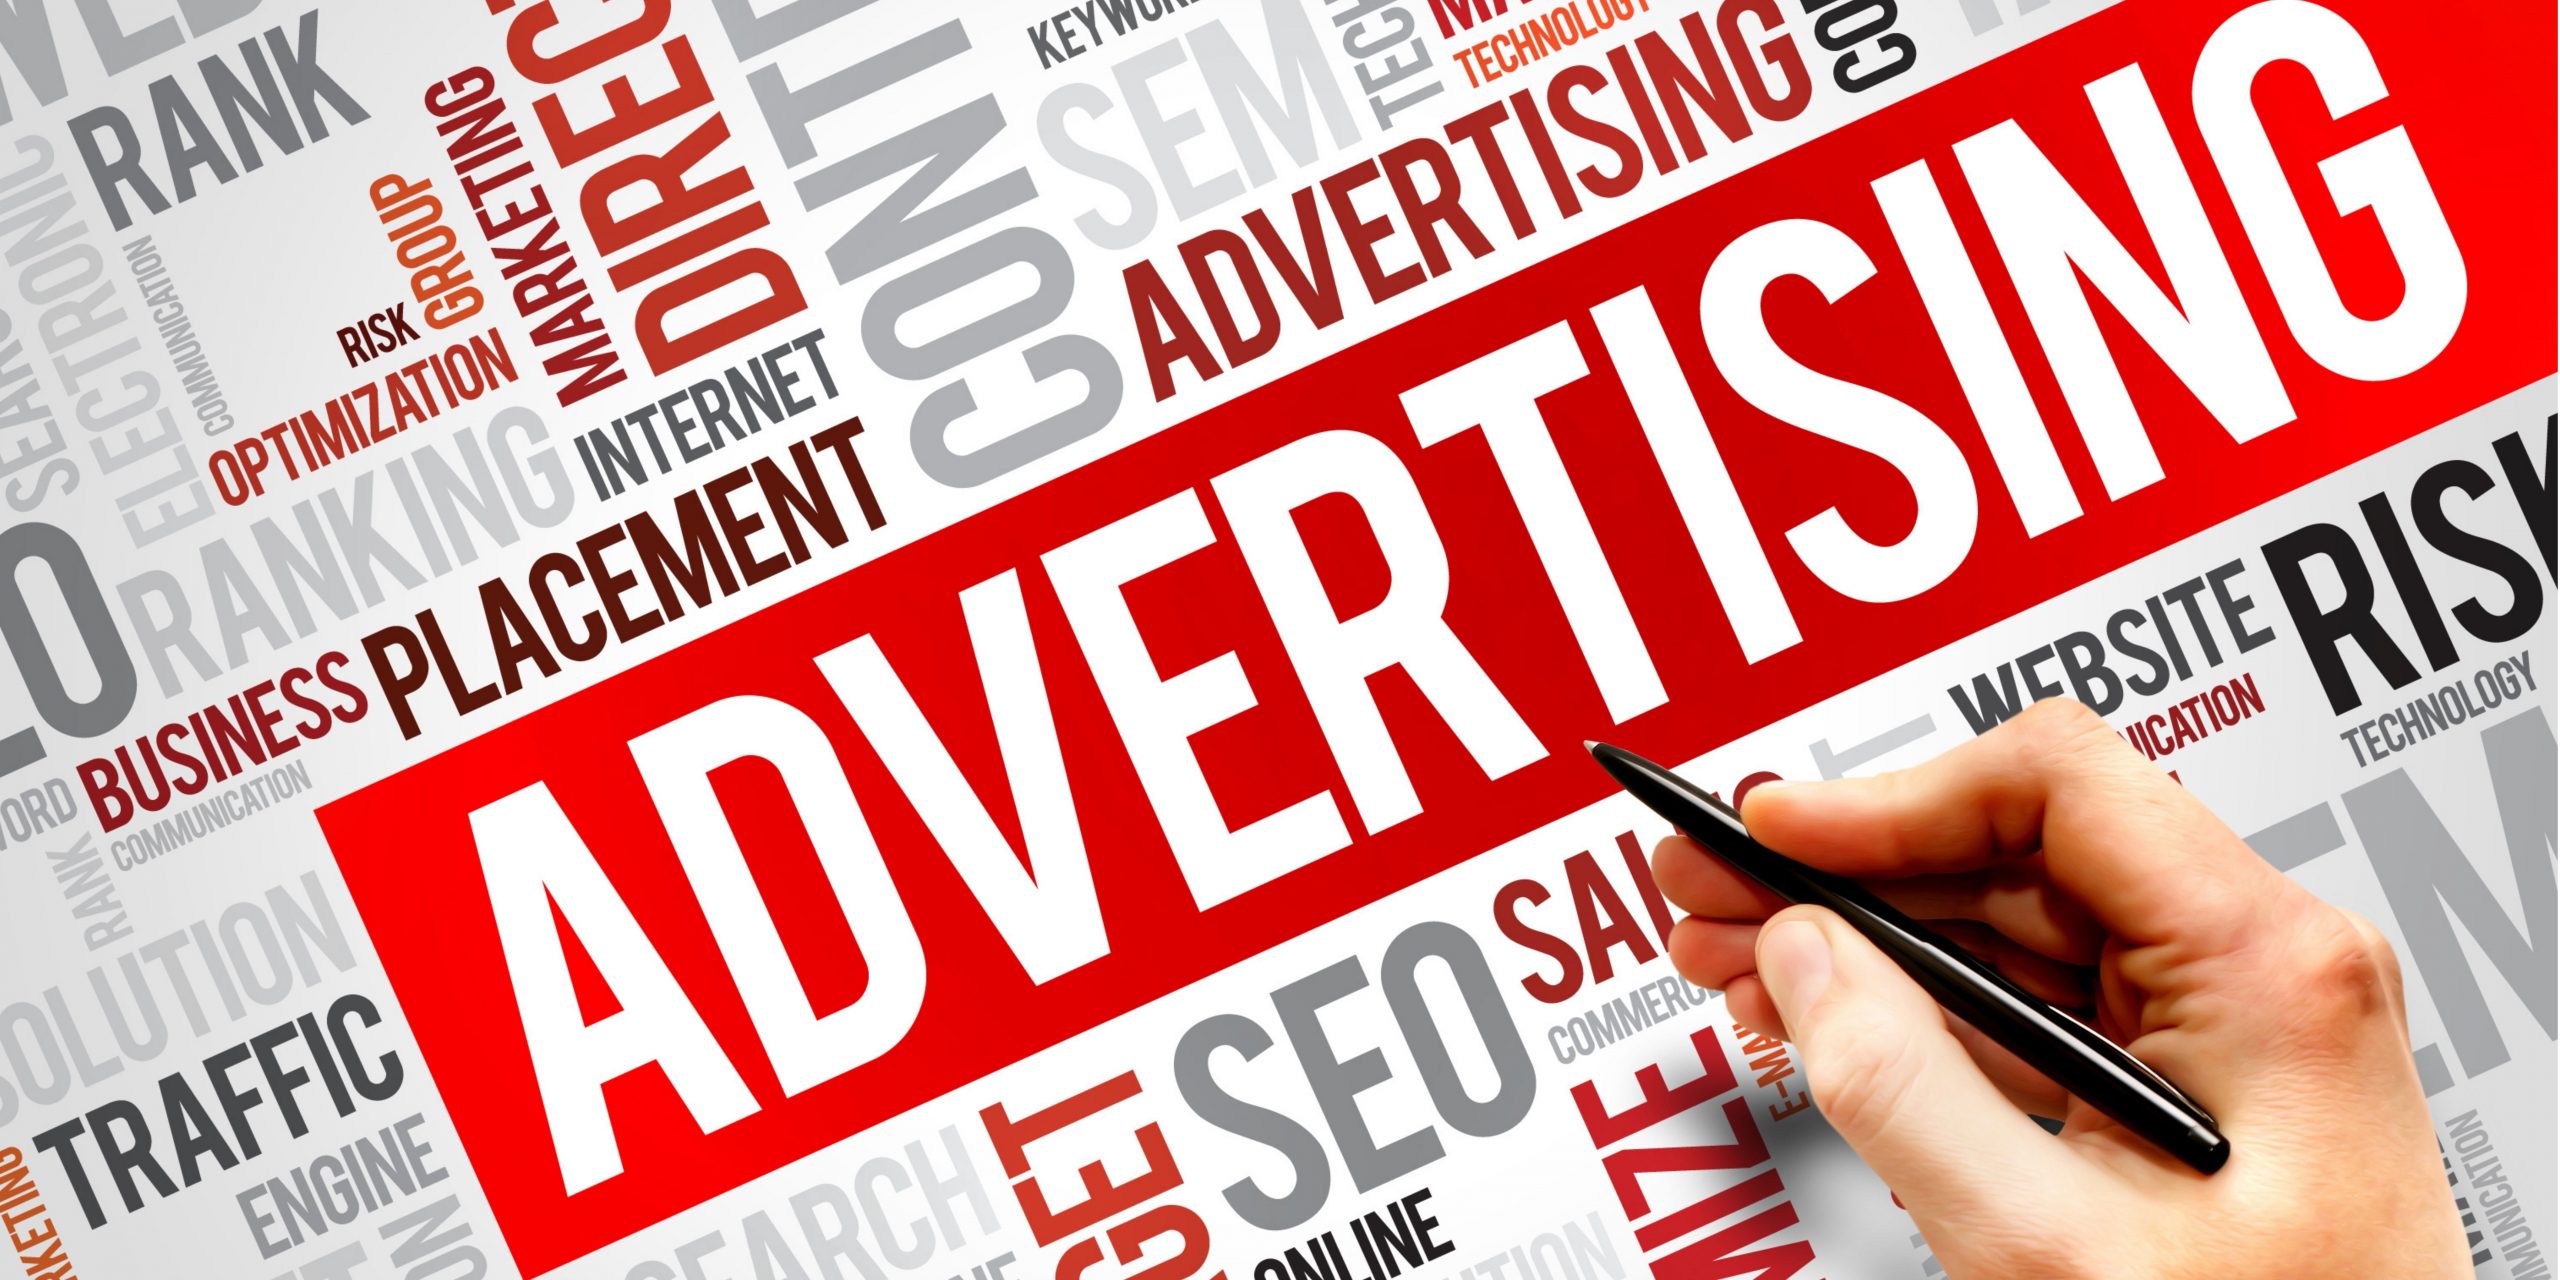 Display Advertising: What You Need to Know to Succeed